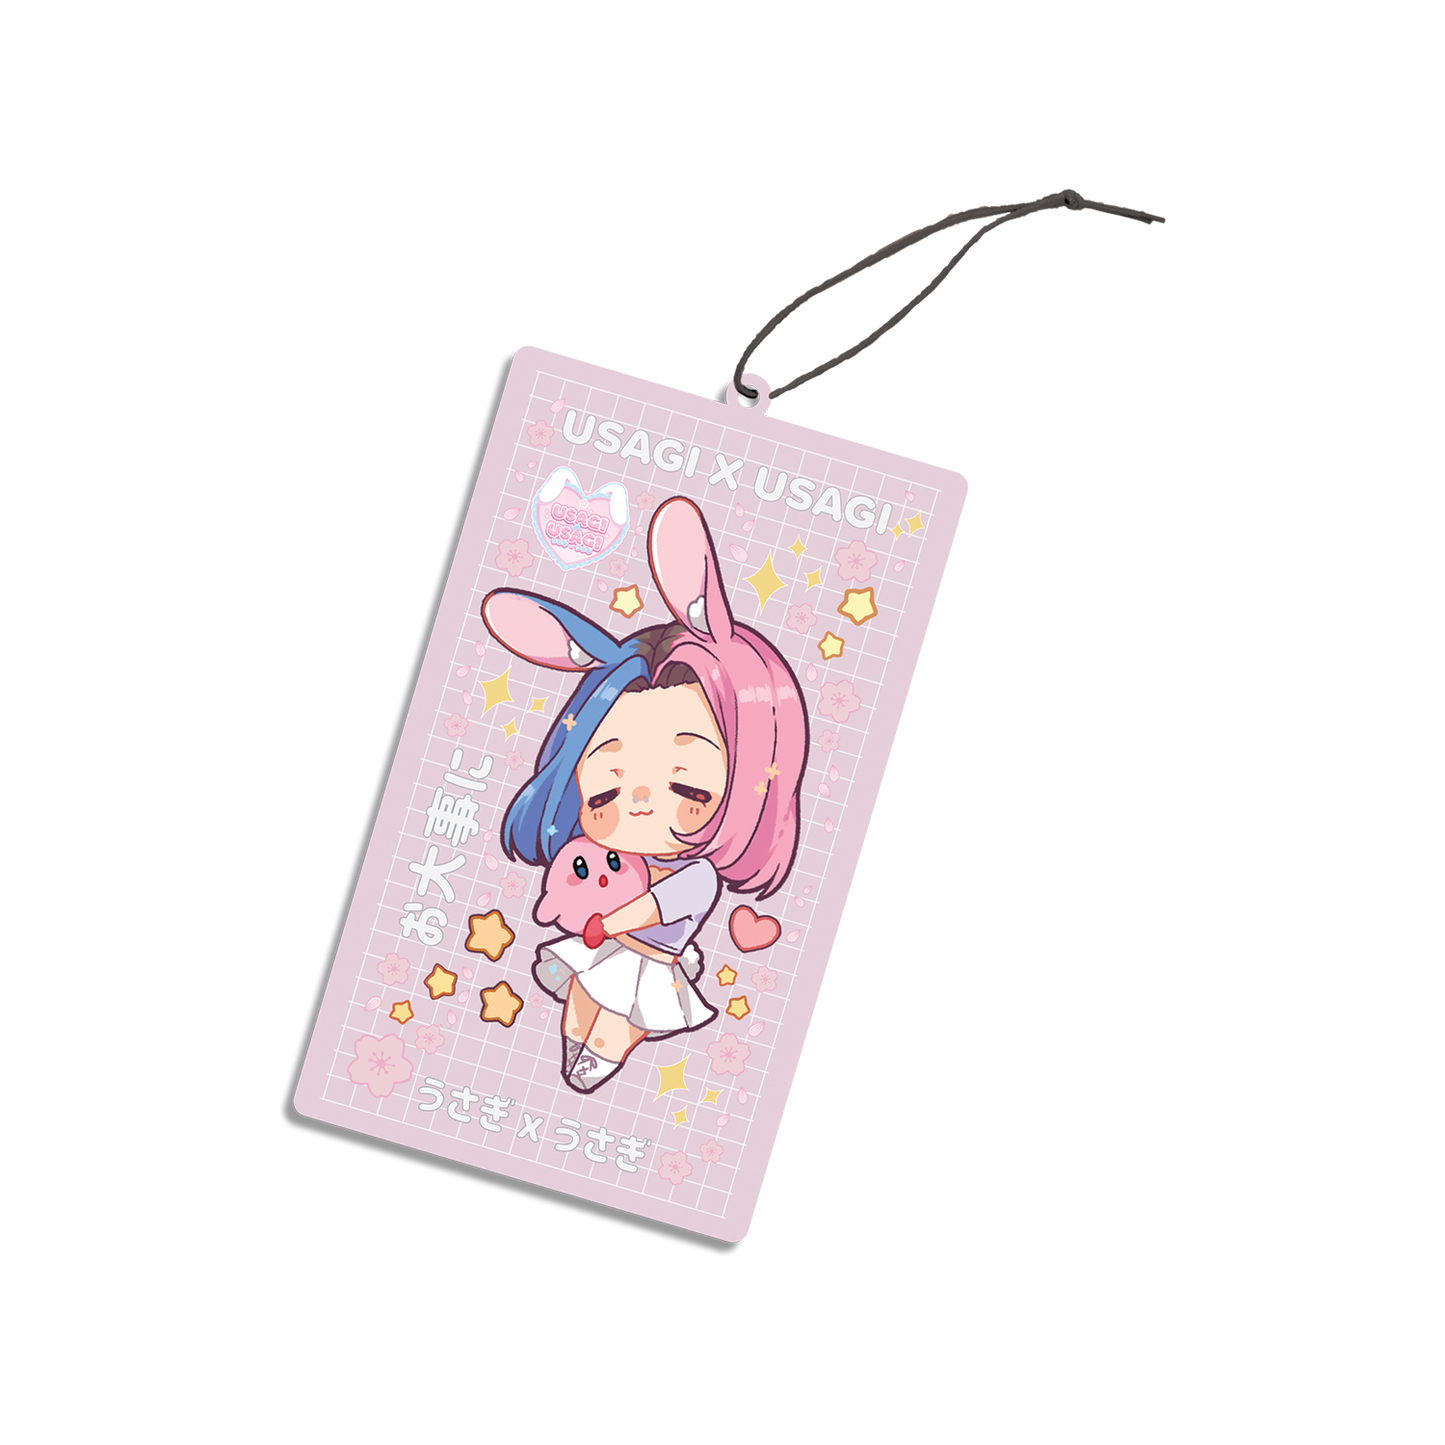 Usagi-Chan Sakura Theme Air Freshener design features Usagi x Usagi's mascot Usagi-Chan holding a Kirby plushy, in a heart cut-out top and white skirt outfit, with a sakura-themed background.